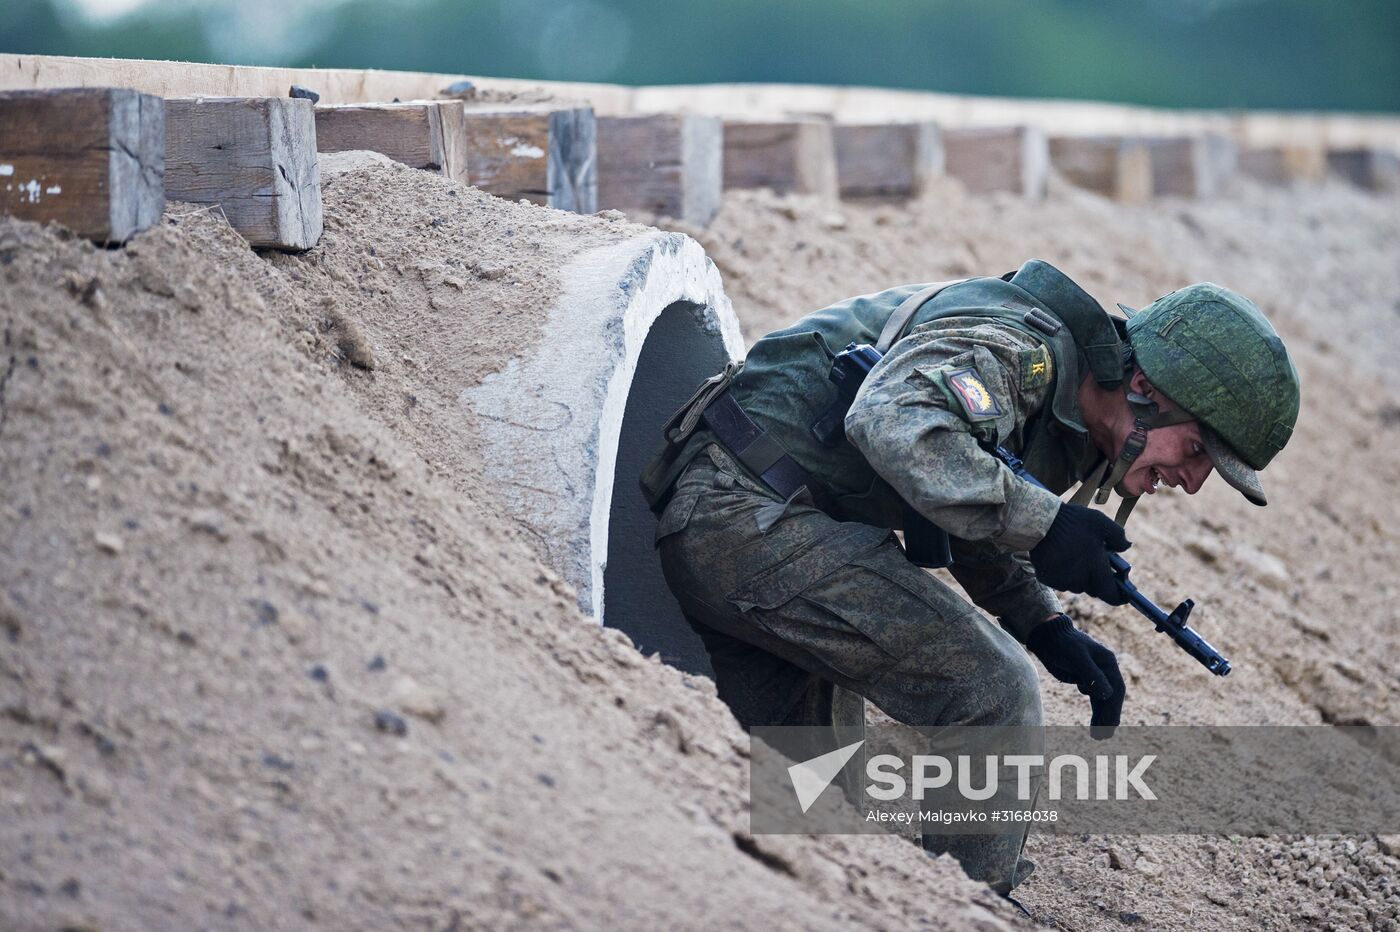 Rembat international military competition in Omsk Region